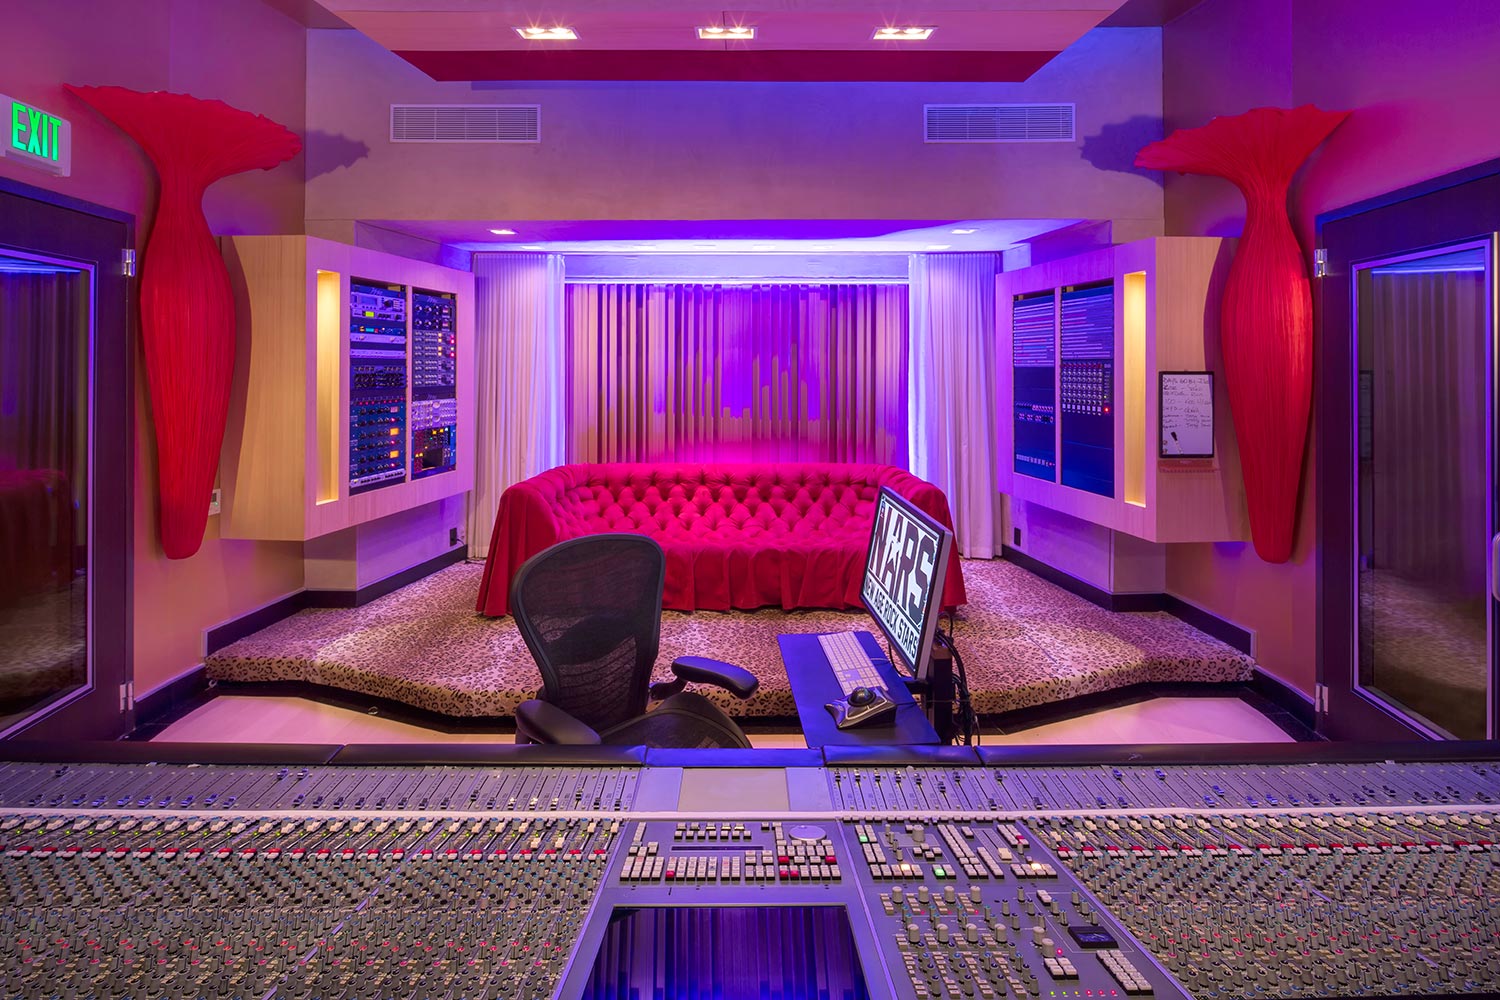 Two of the contemporary music scene’s most prolific hit producers and mixing engineer, Nate ‘Danja’ Hills and Marcella Araica have added a cutting edge, WSDG recording studio to their N.A.R.S. (New Age Rock Stars) label. Studio A, Marcella's studio.